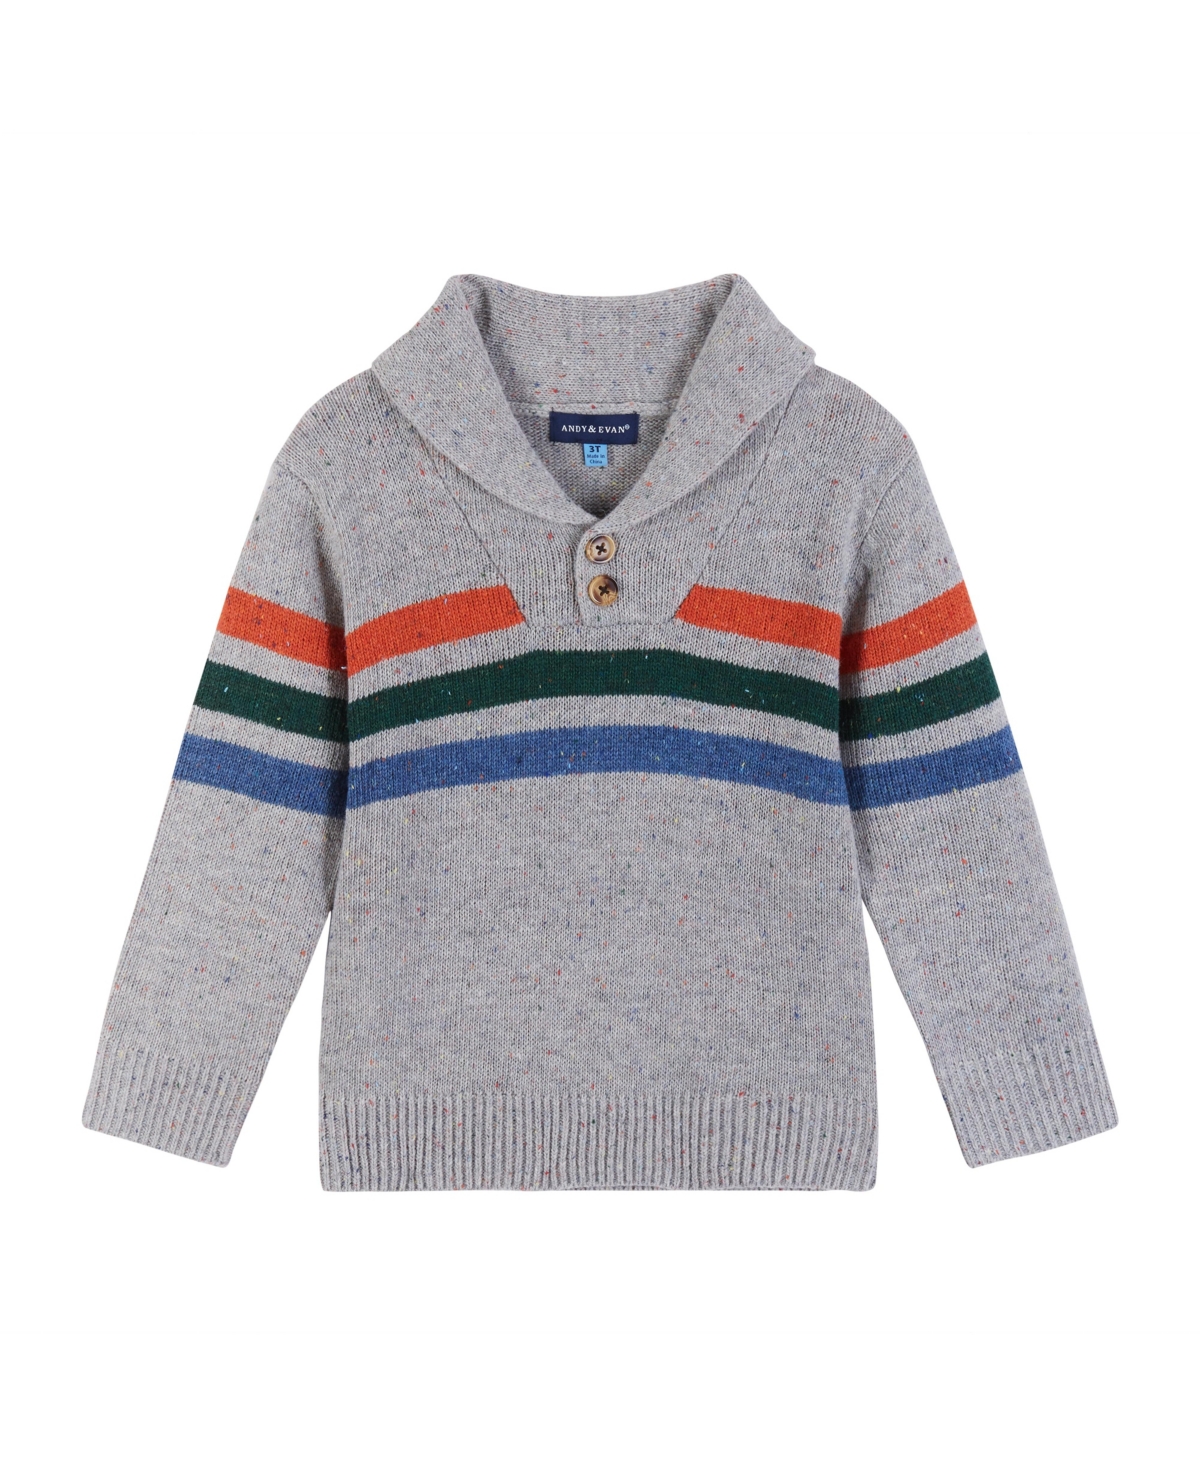 ANDY & EVAN TODDLER BOYS / STRIPED BUTTON SWEATER